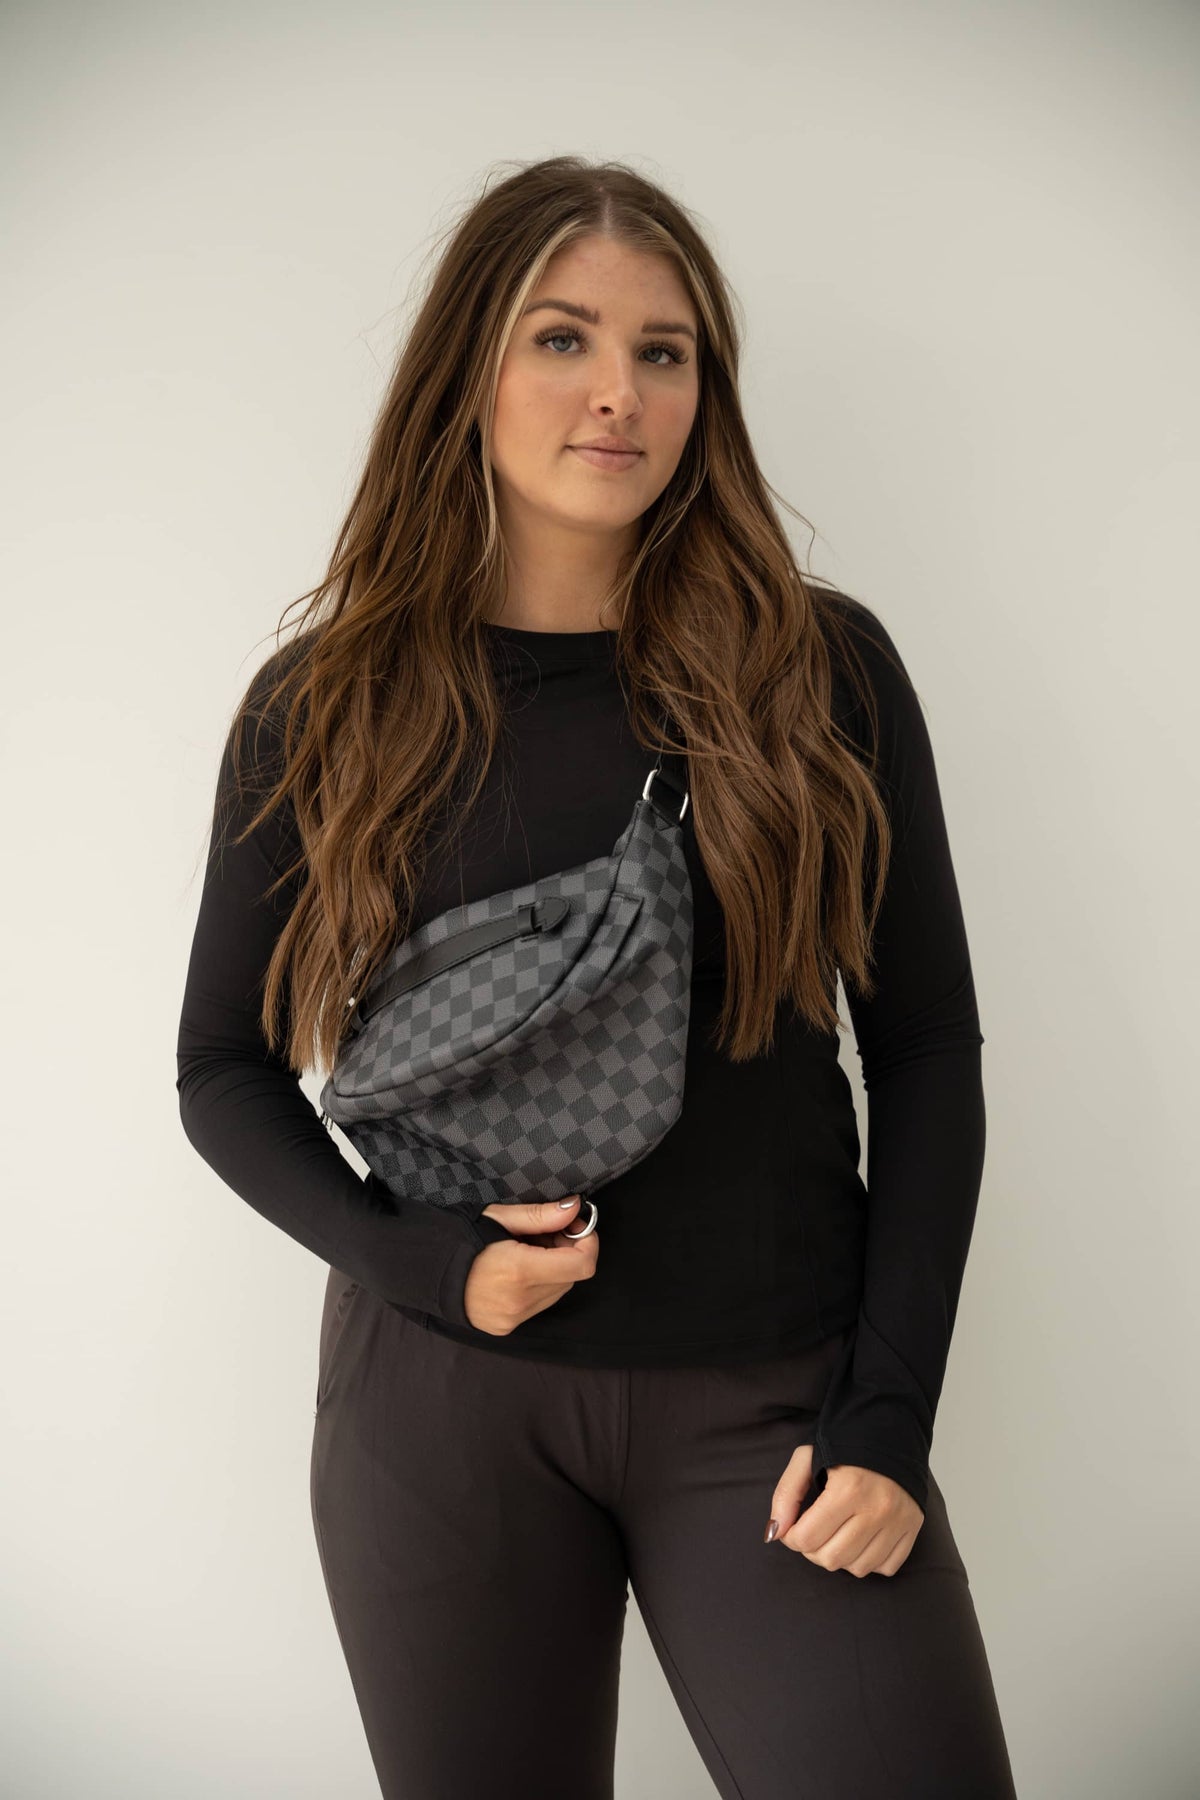 Black & Gray checkered bum bag with adjustable buckle straps and zippered closure.